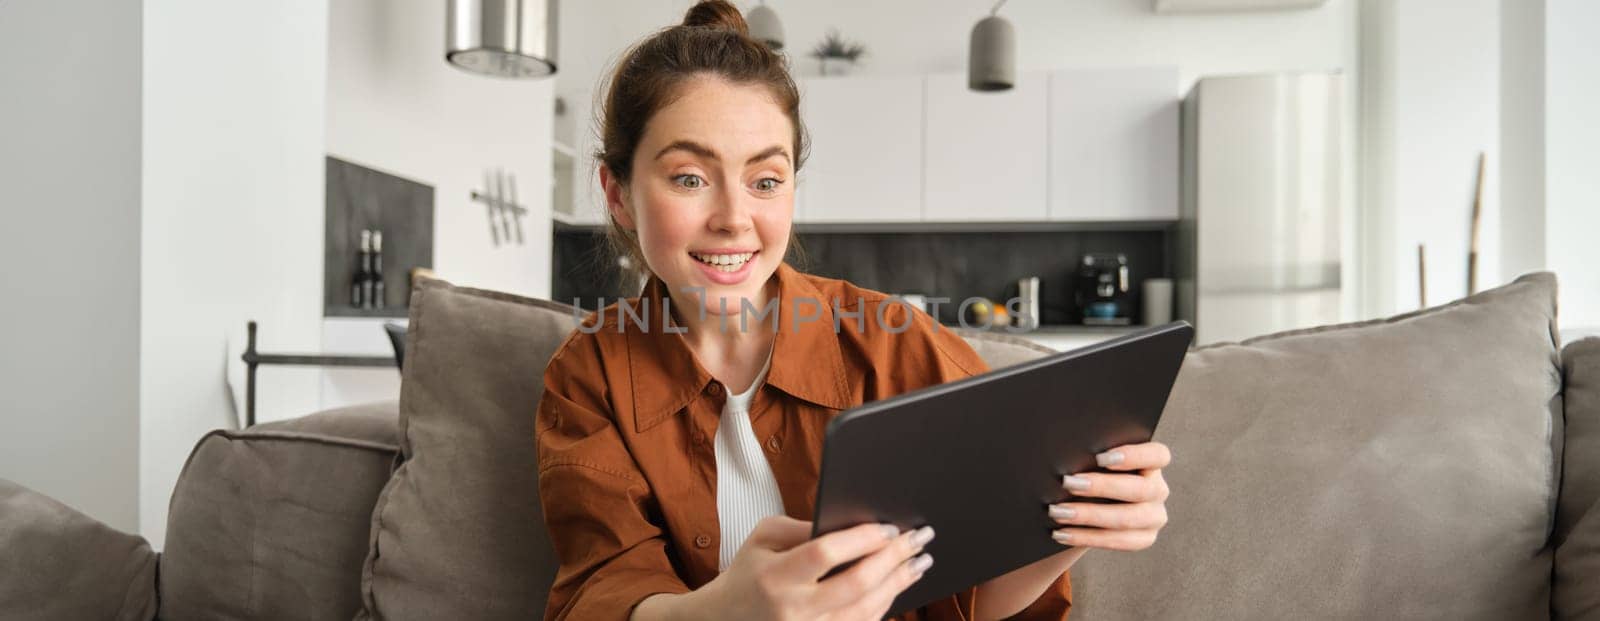 Portrait of excited, smiling young woman playing games on her digital tablet, tilting gadget and looking amused at screen, sitting on couch at home.